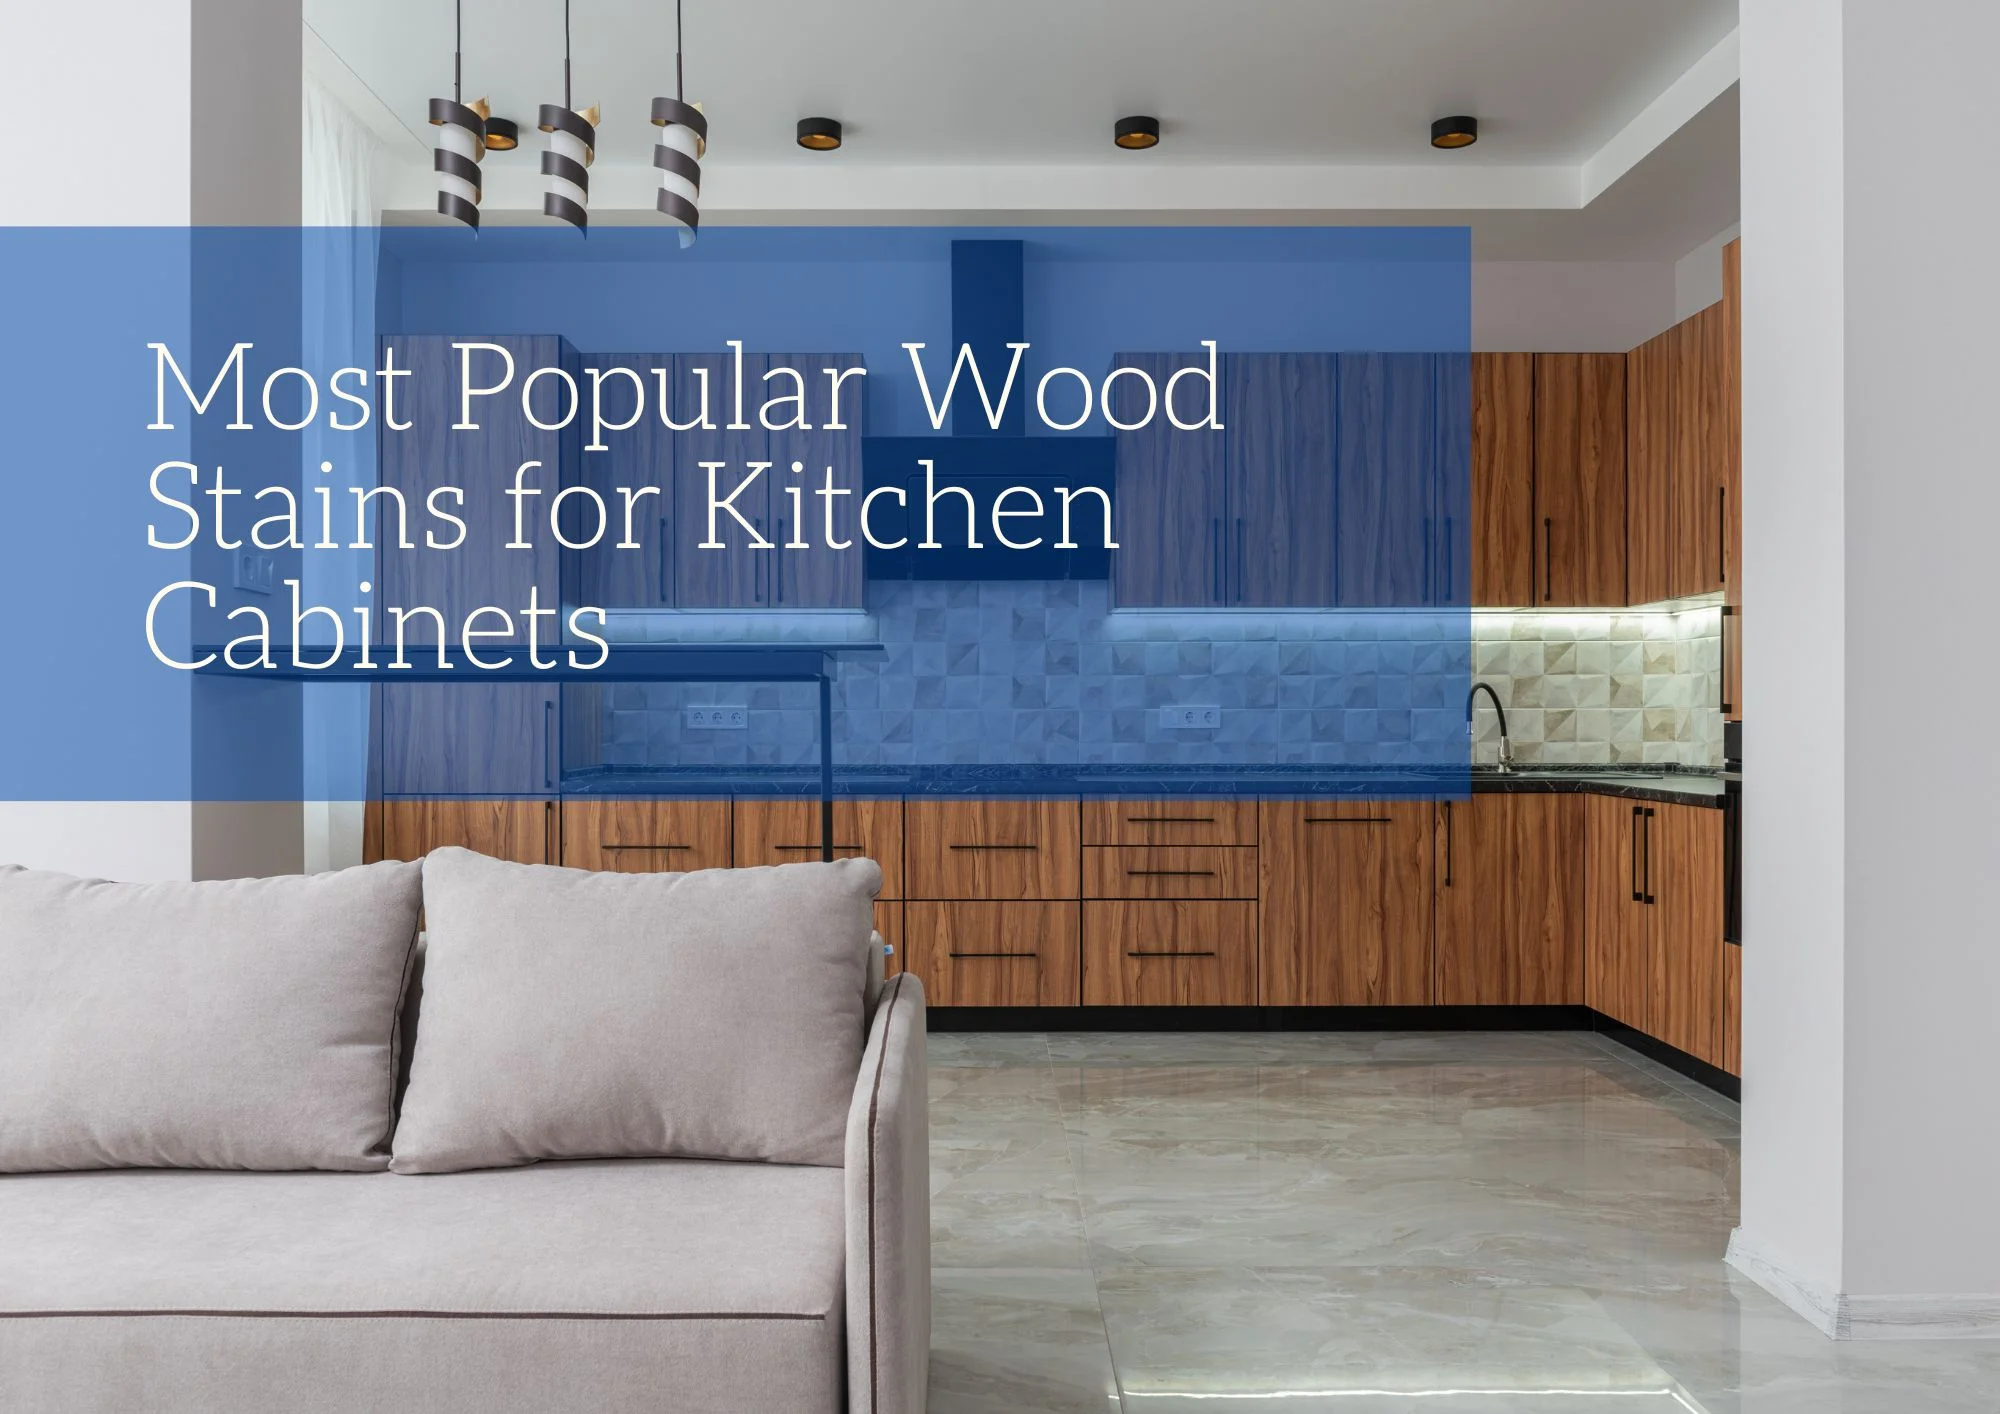 Most Popular Wood Stains for Kitchen Cabinets